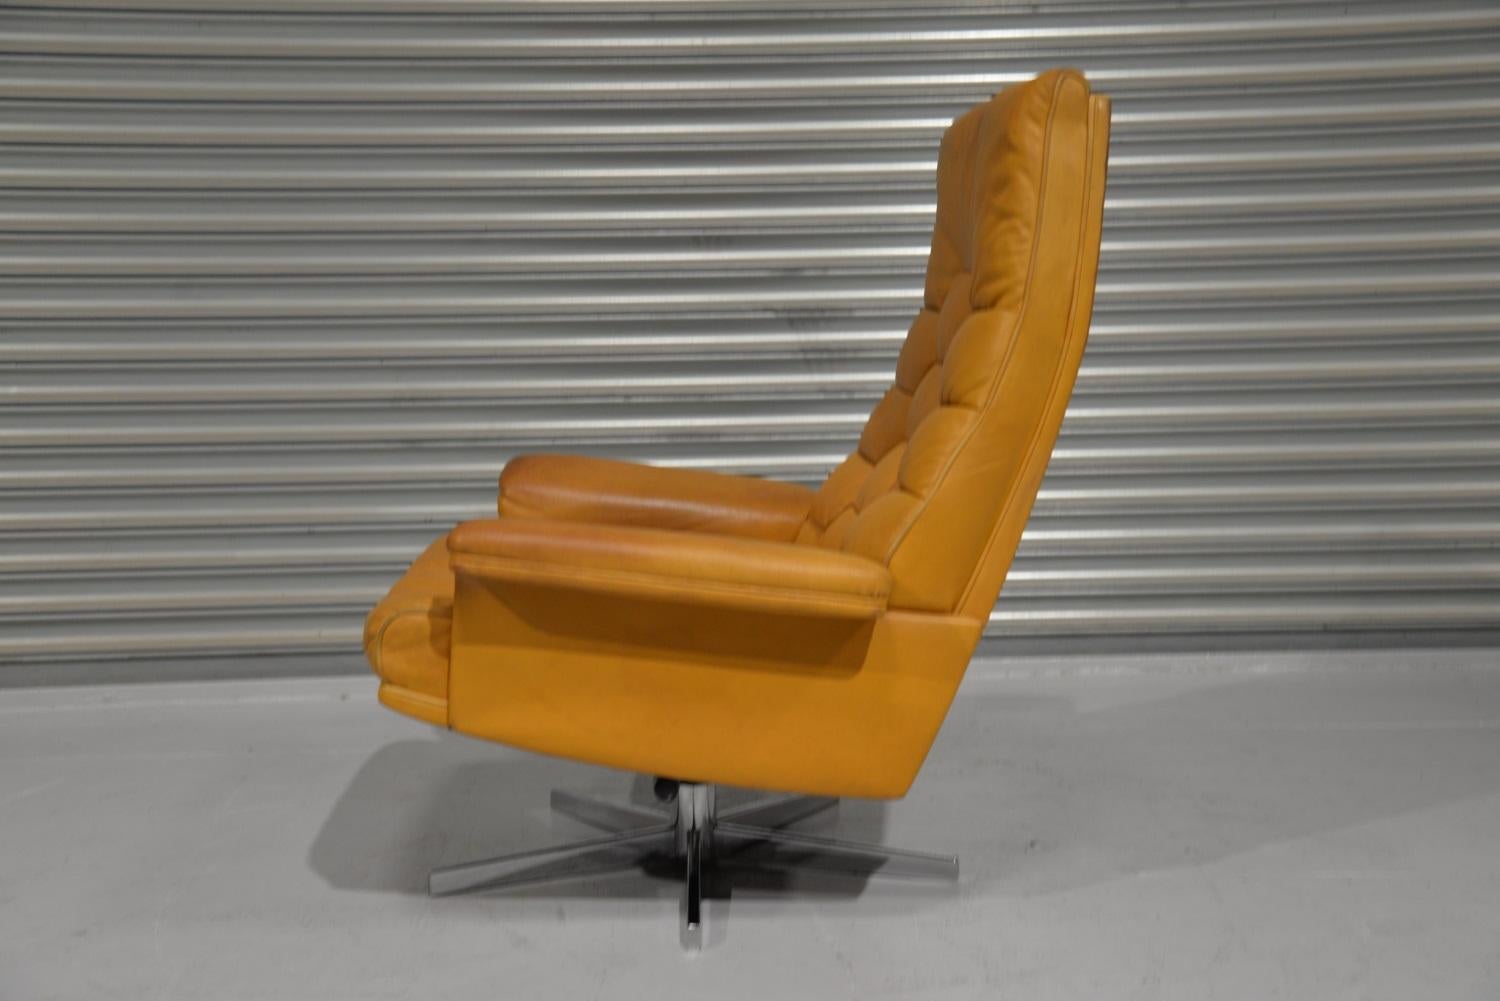 Discounted airfreight for our International and US customers (from 2 weeks door to door) 

We are delighted to bring to you an ultra-rare and highly desirable De Sede Executive swivel lounge armchair. Hand built in the 1970s by De Sede craftsman